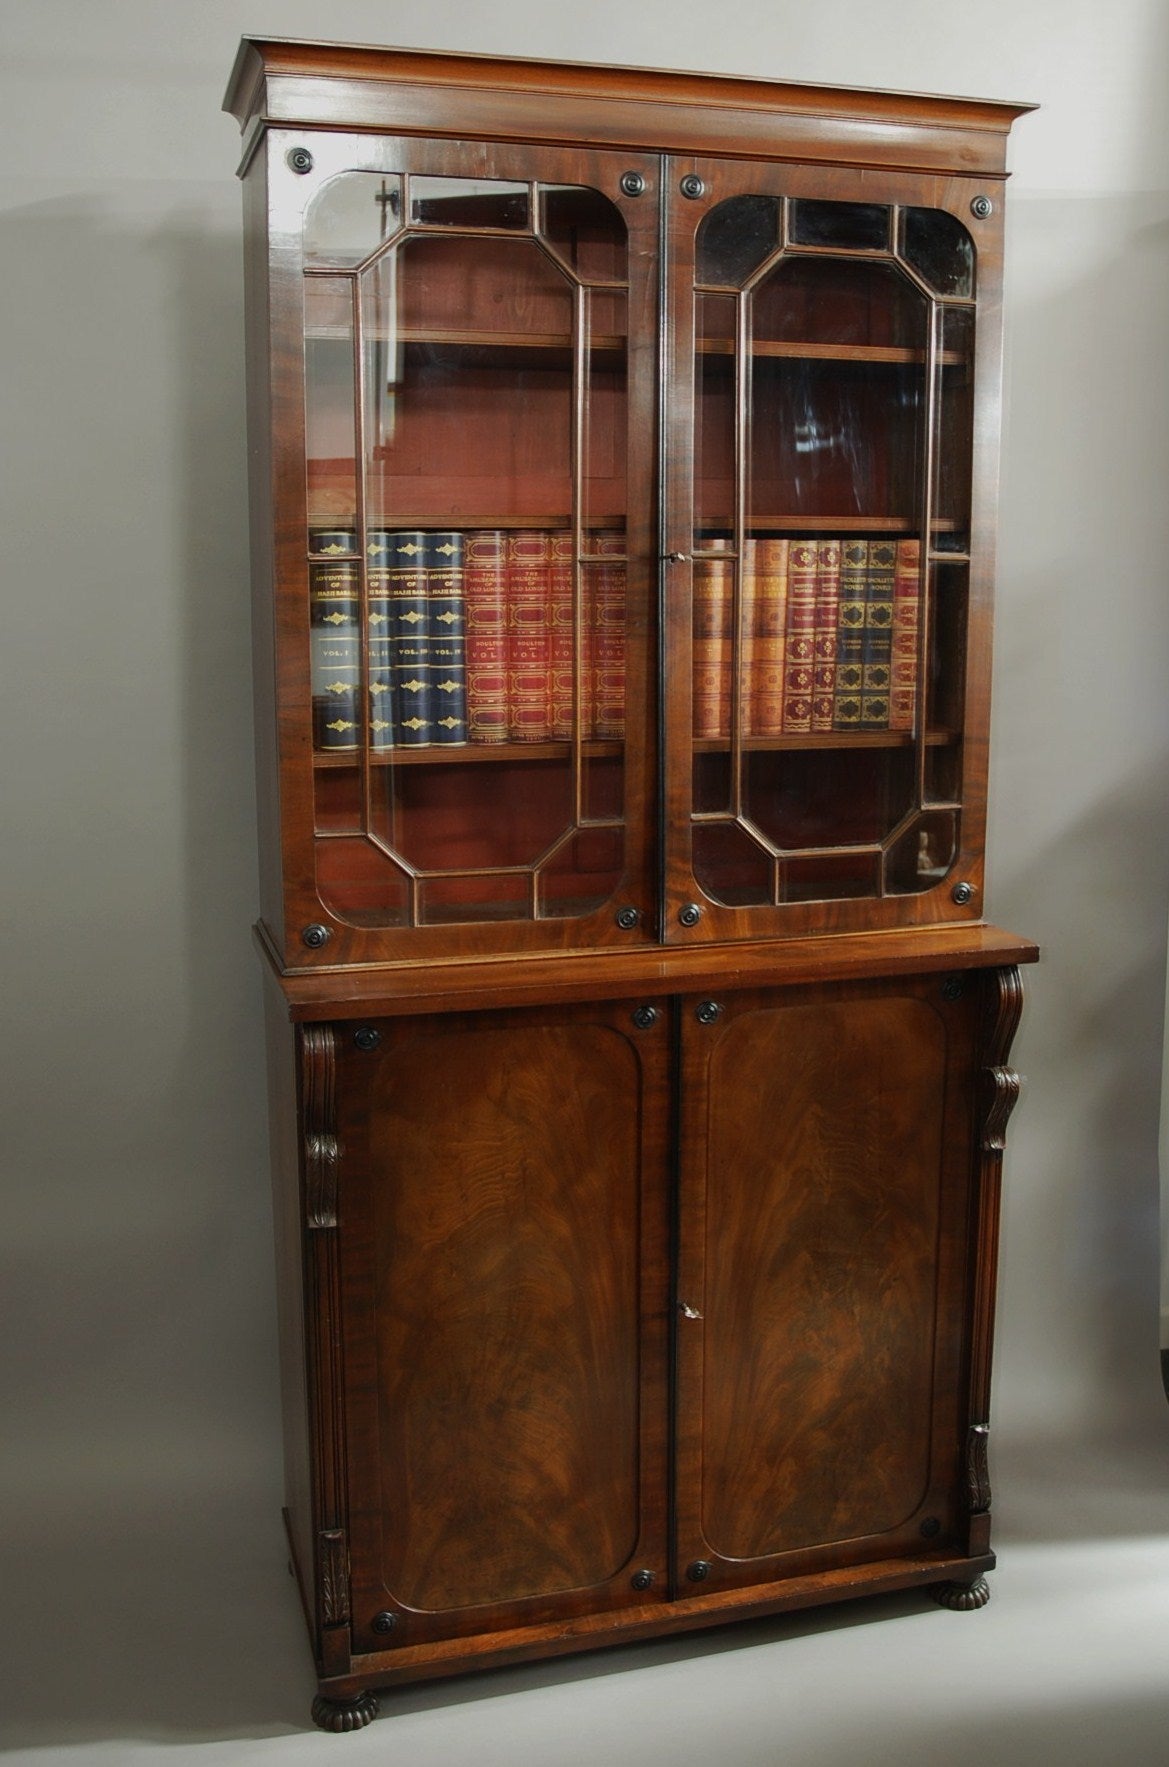 A late 18th-early 19th century mahogany glazed bookcase.

This bookcase consists of a cornice with a shaped moulding with two astragal glazed doors below.

The doors consist of ebonised paterae to each corner with ebonised beading to the